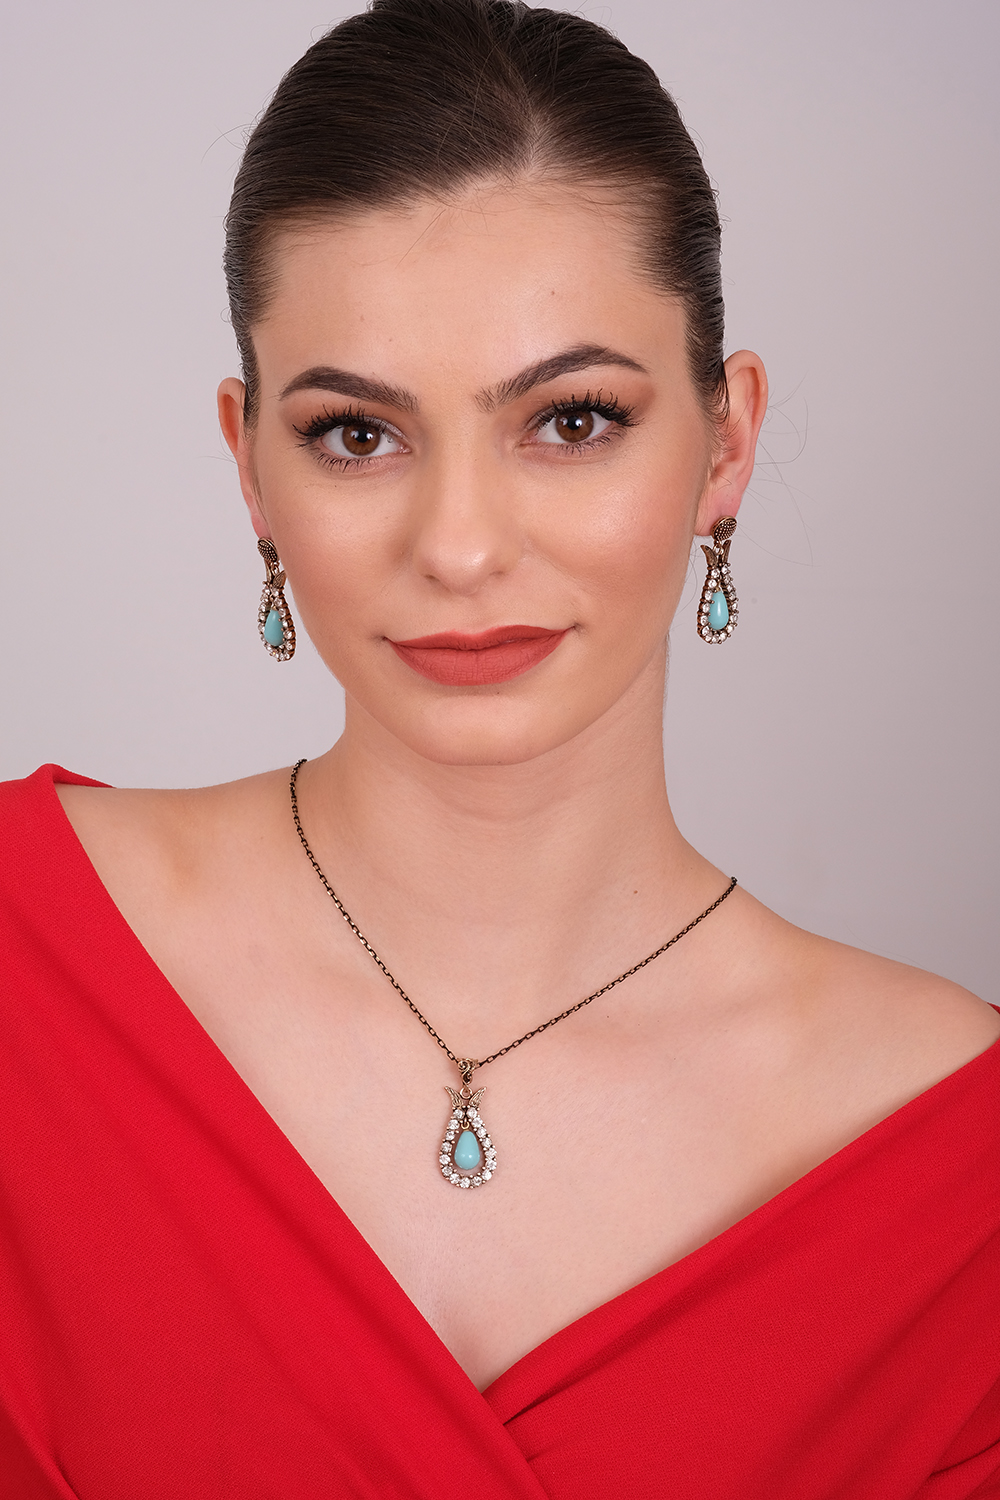 CALLISTO Necklace and Earrings Jewelry Set